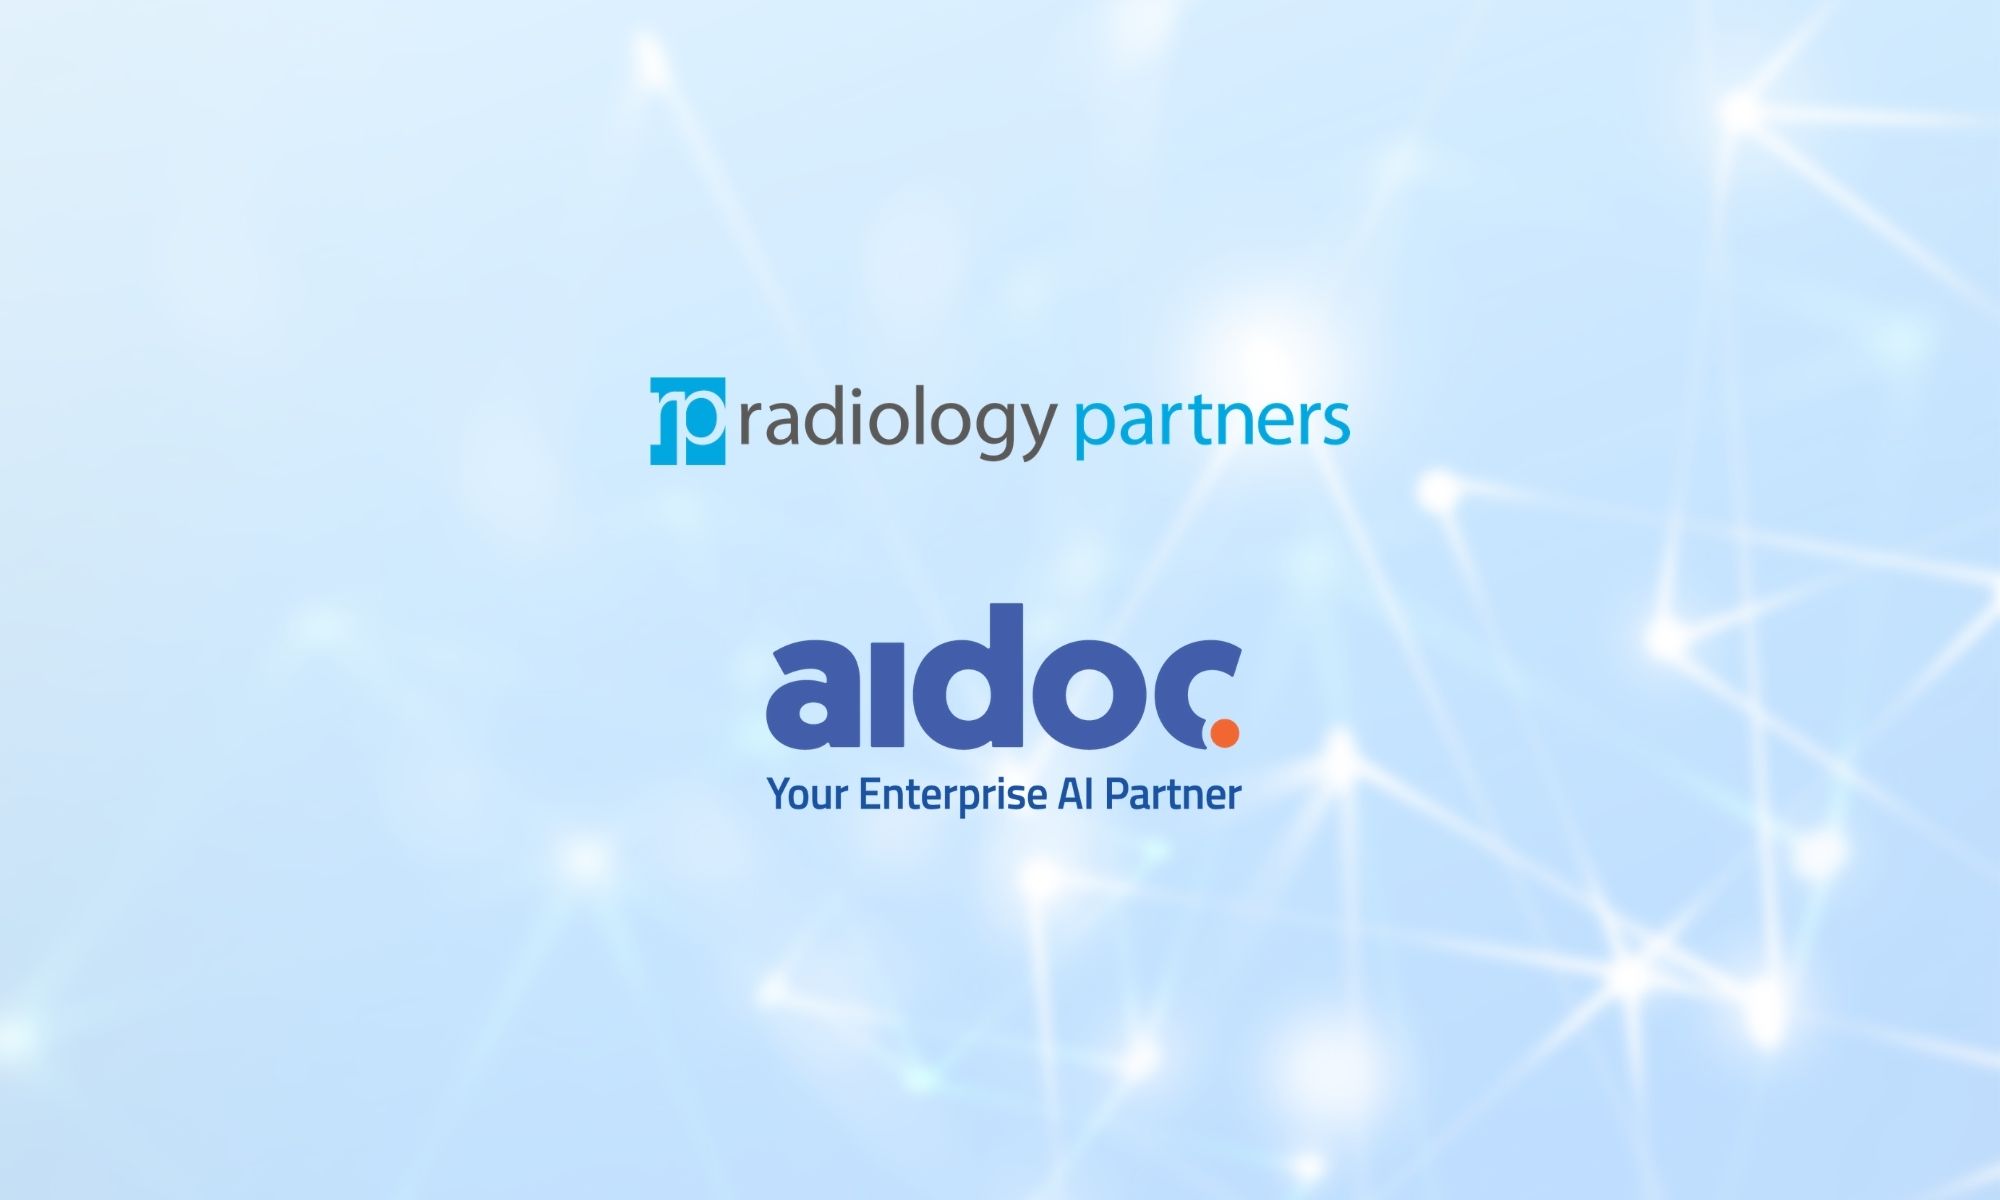 Radiology Partners and Aidoc to Accelerate the use of AI as the Standard of Care in Radiology